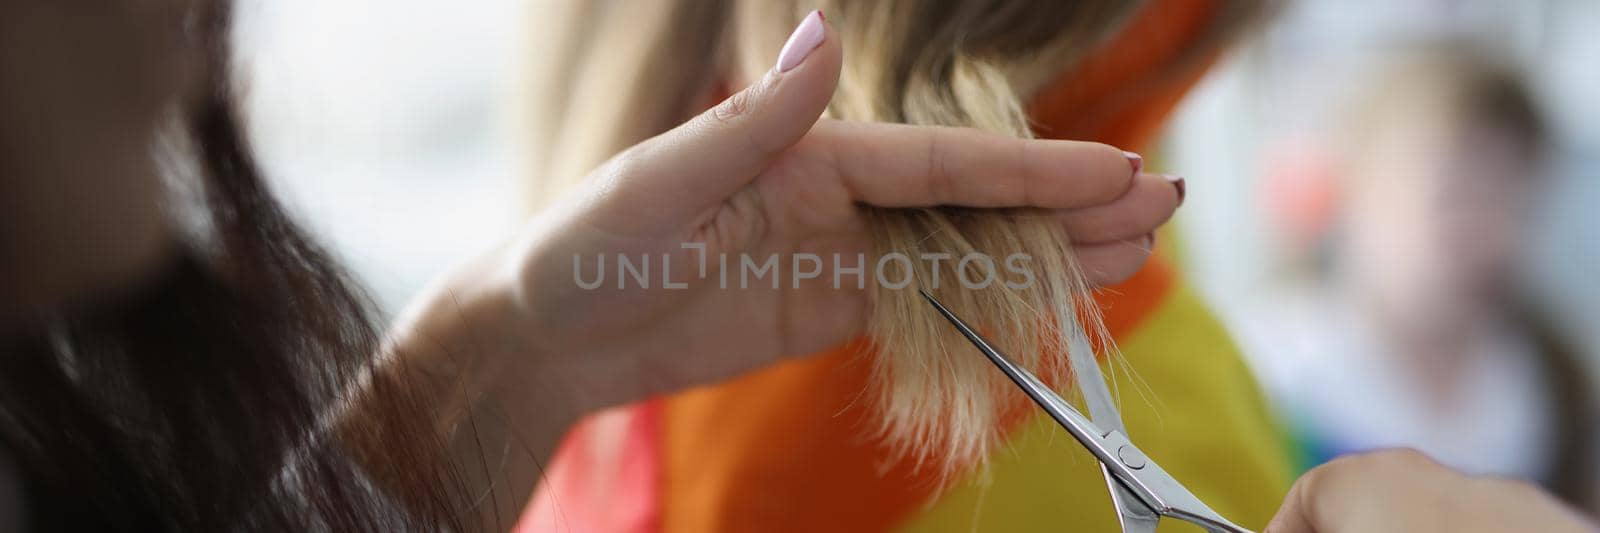 Woman holding lock of hair and cutting with scissors equipment by kuprevich